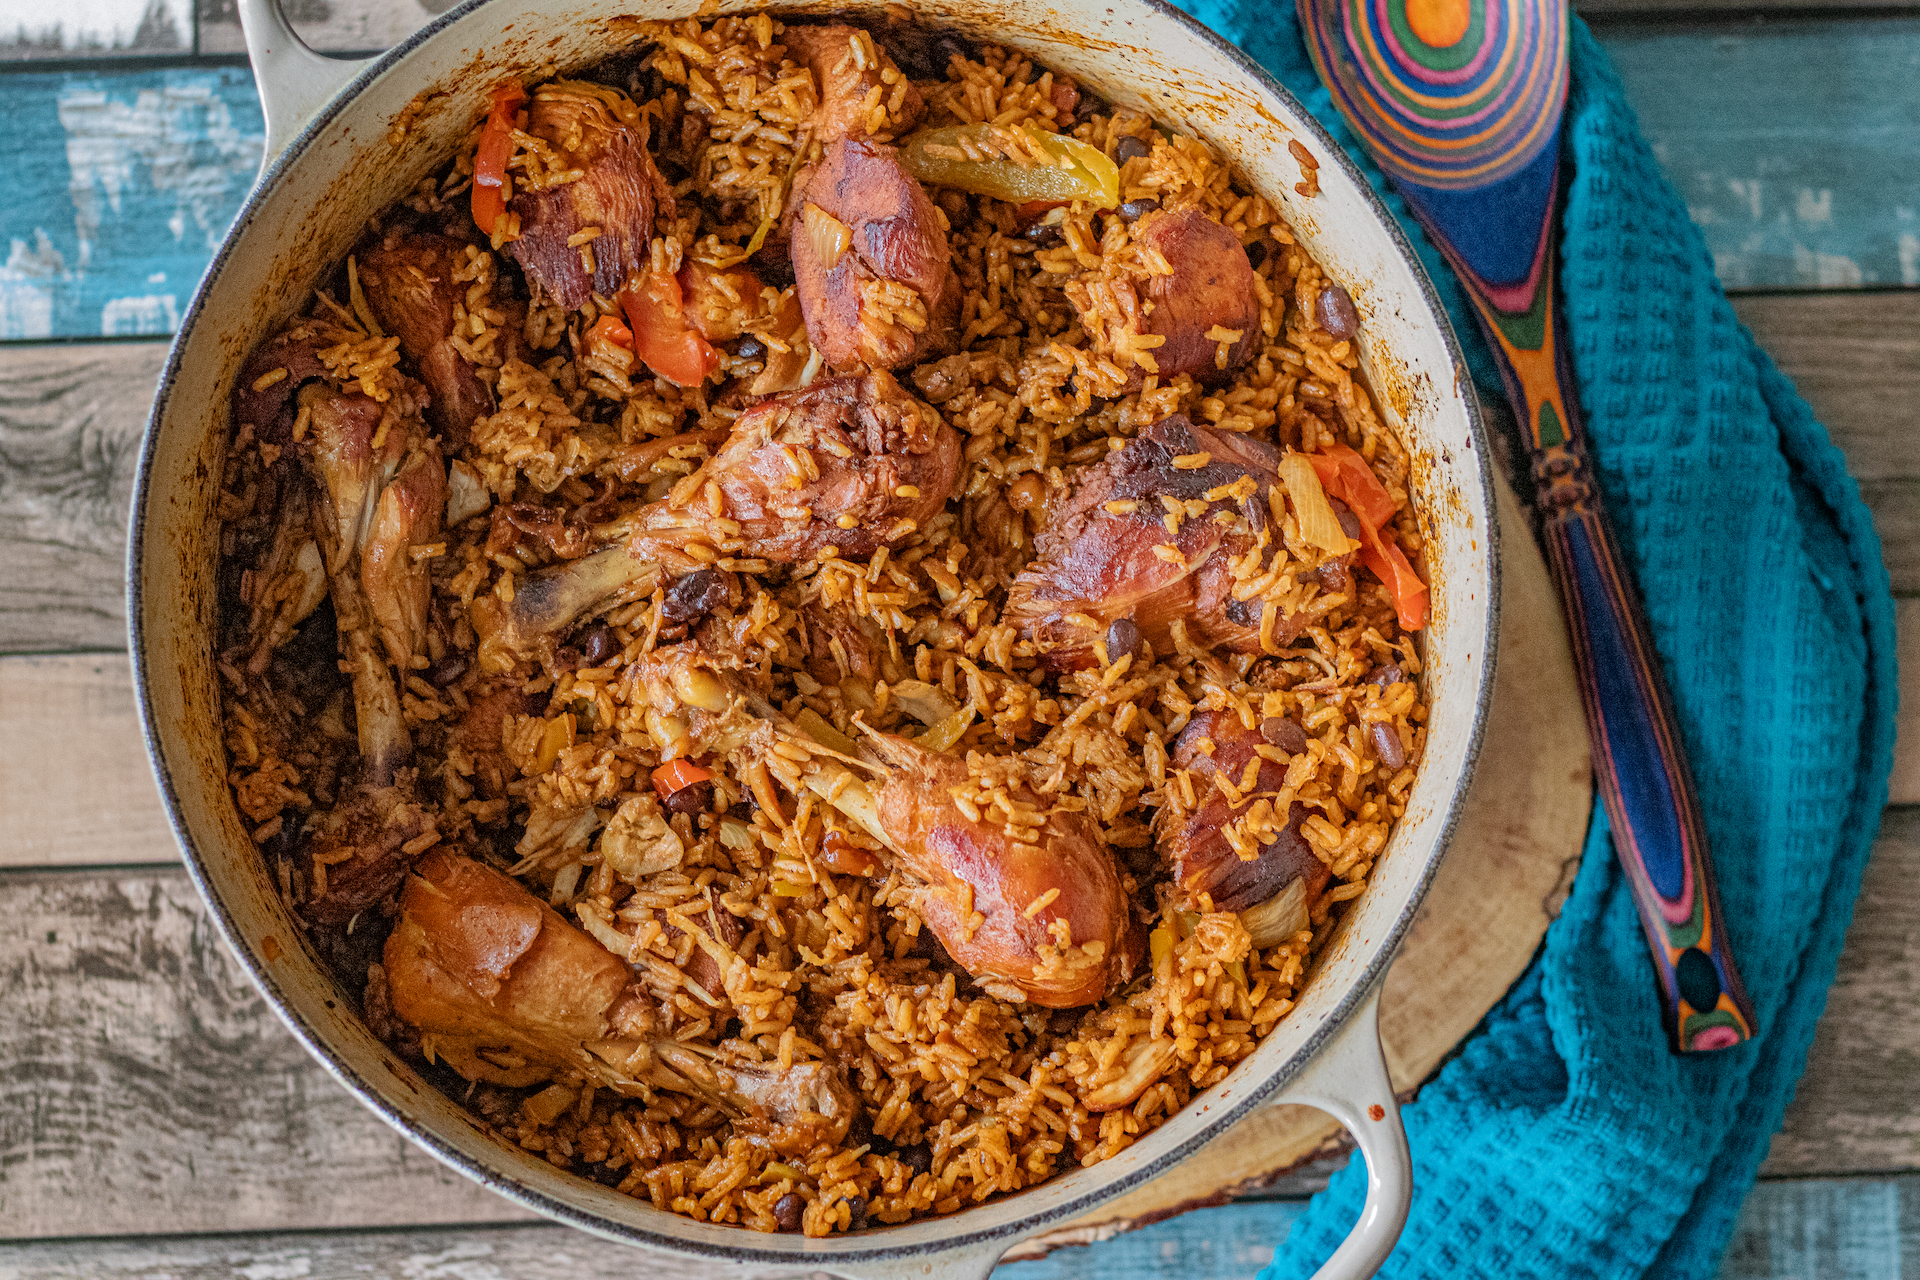 Over the top shot of a cooking pan with moro locrio in it. Moro and locrio are two different dominican dishes that I combined into one. Moro is rice with black beans and locrio is a chicken and rice dish. Beautifully seasoned and with a golden color.